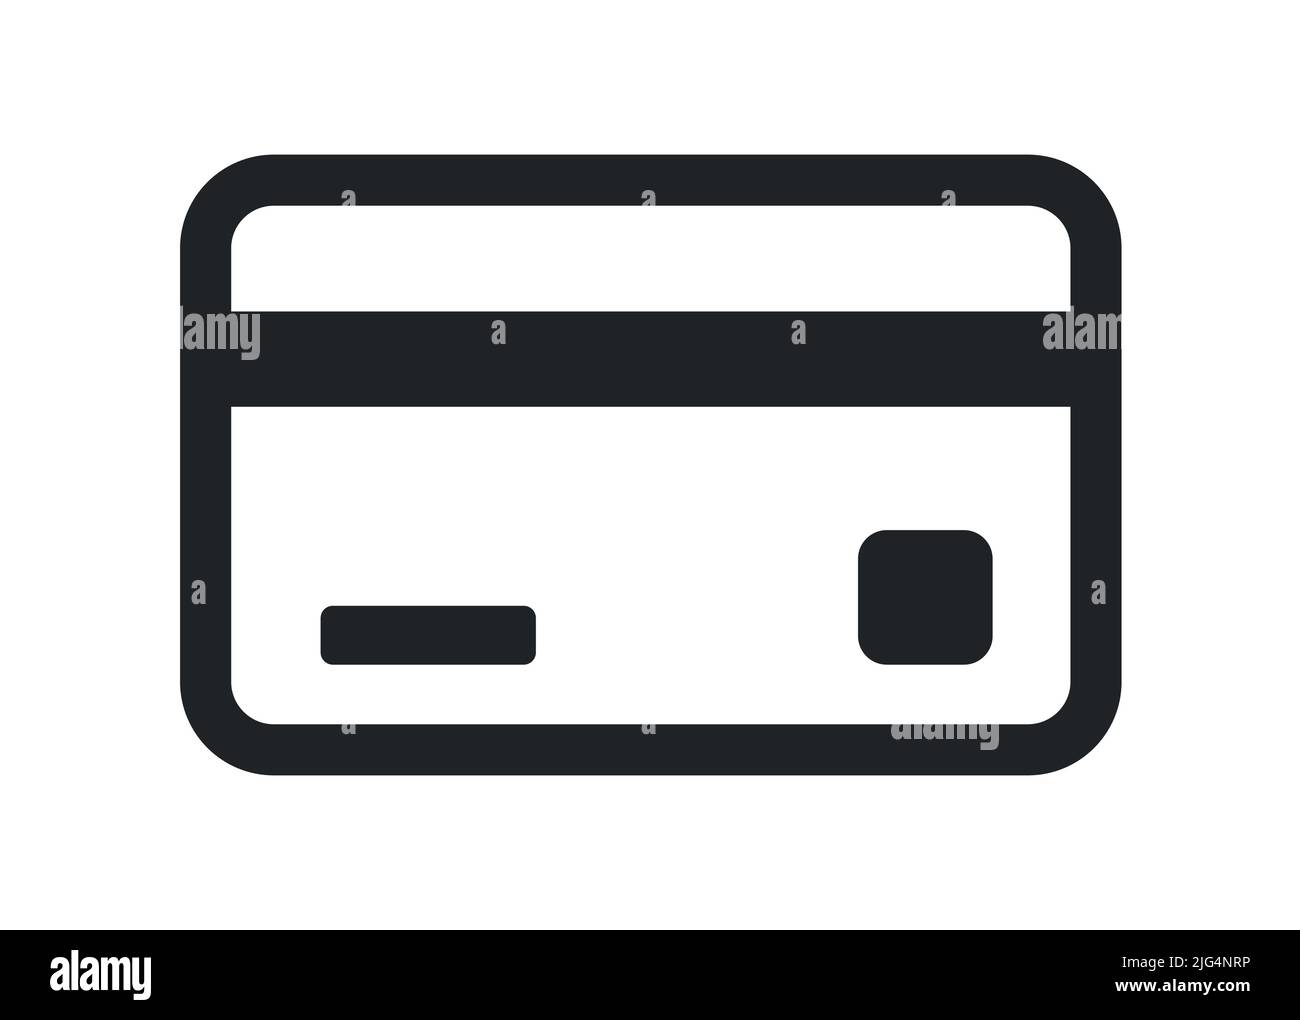 Credit card symbol for payment vector illustration icon Stock Vector